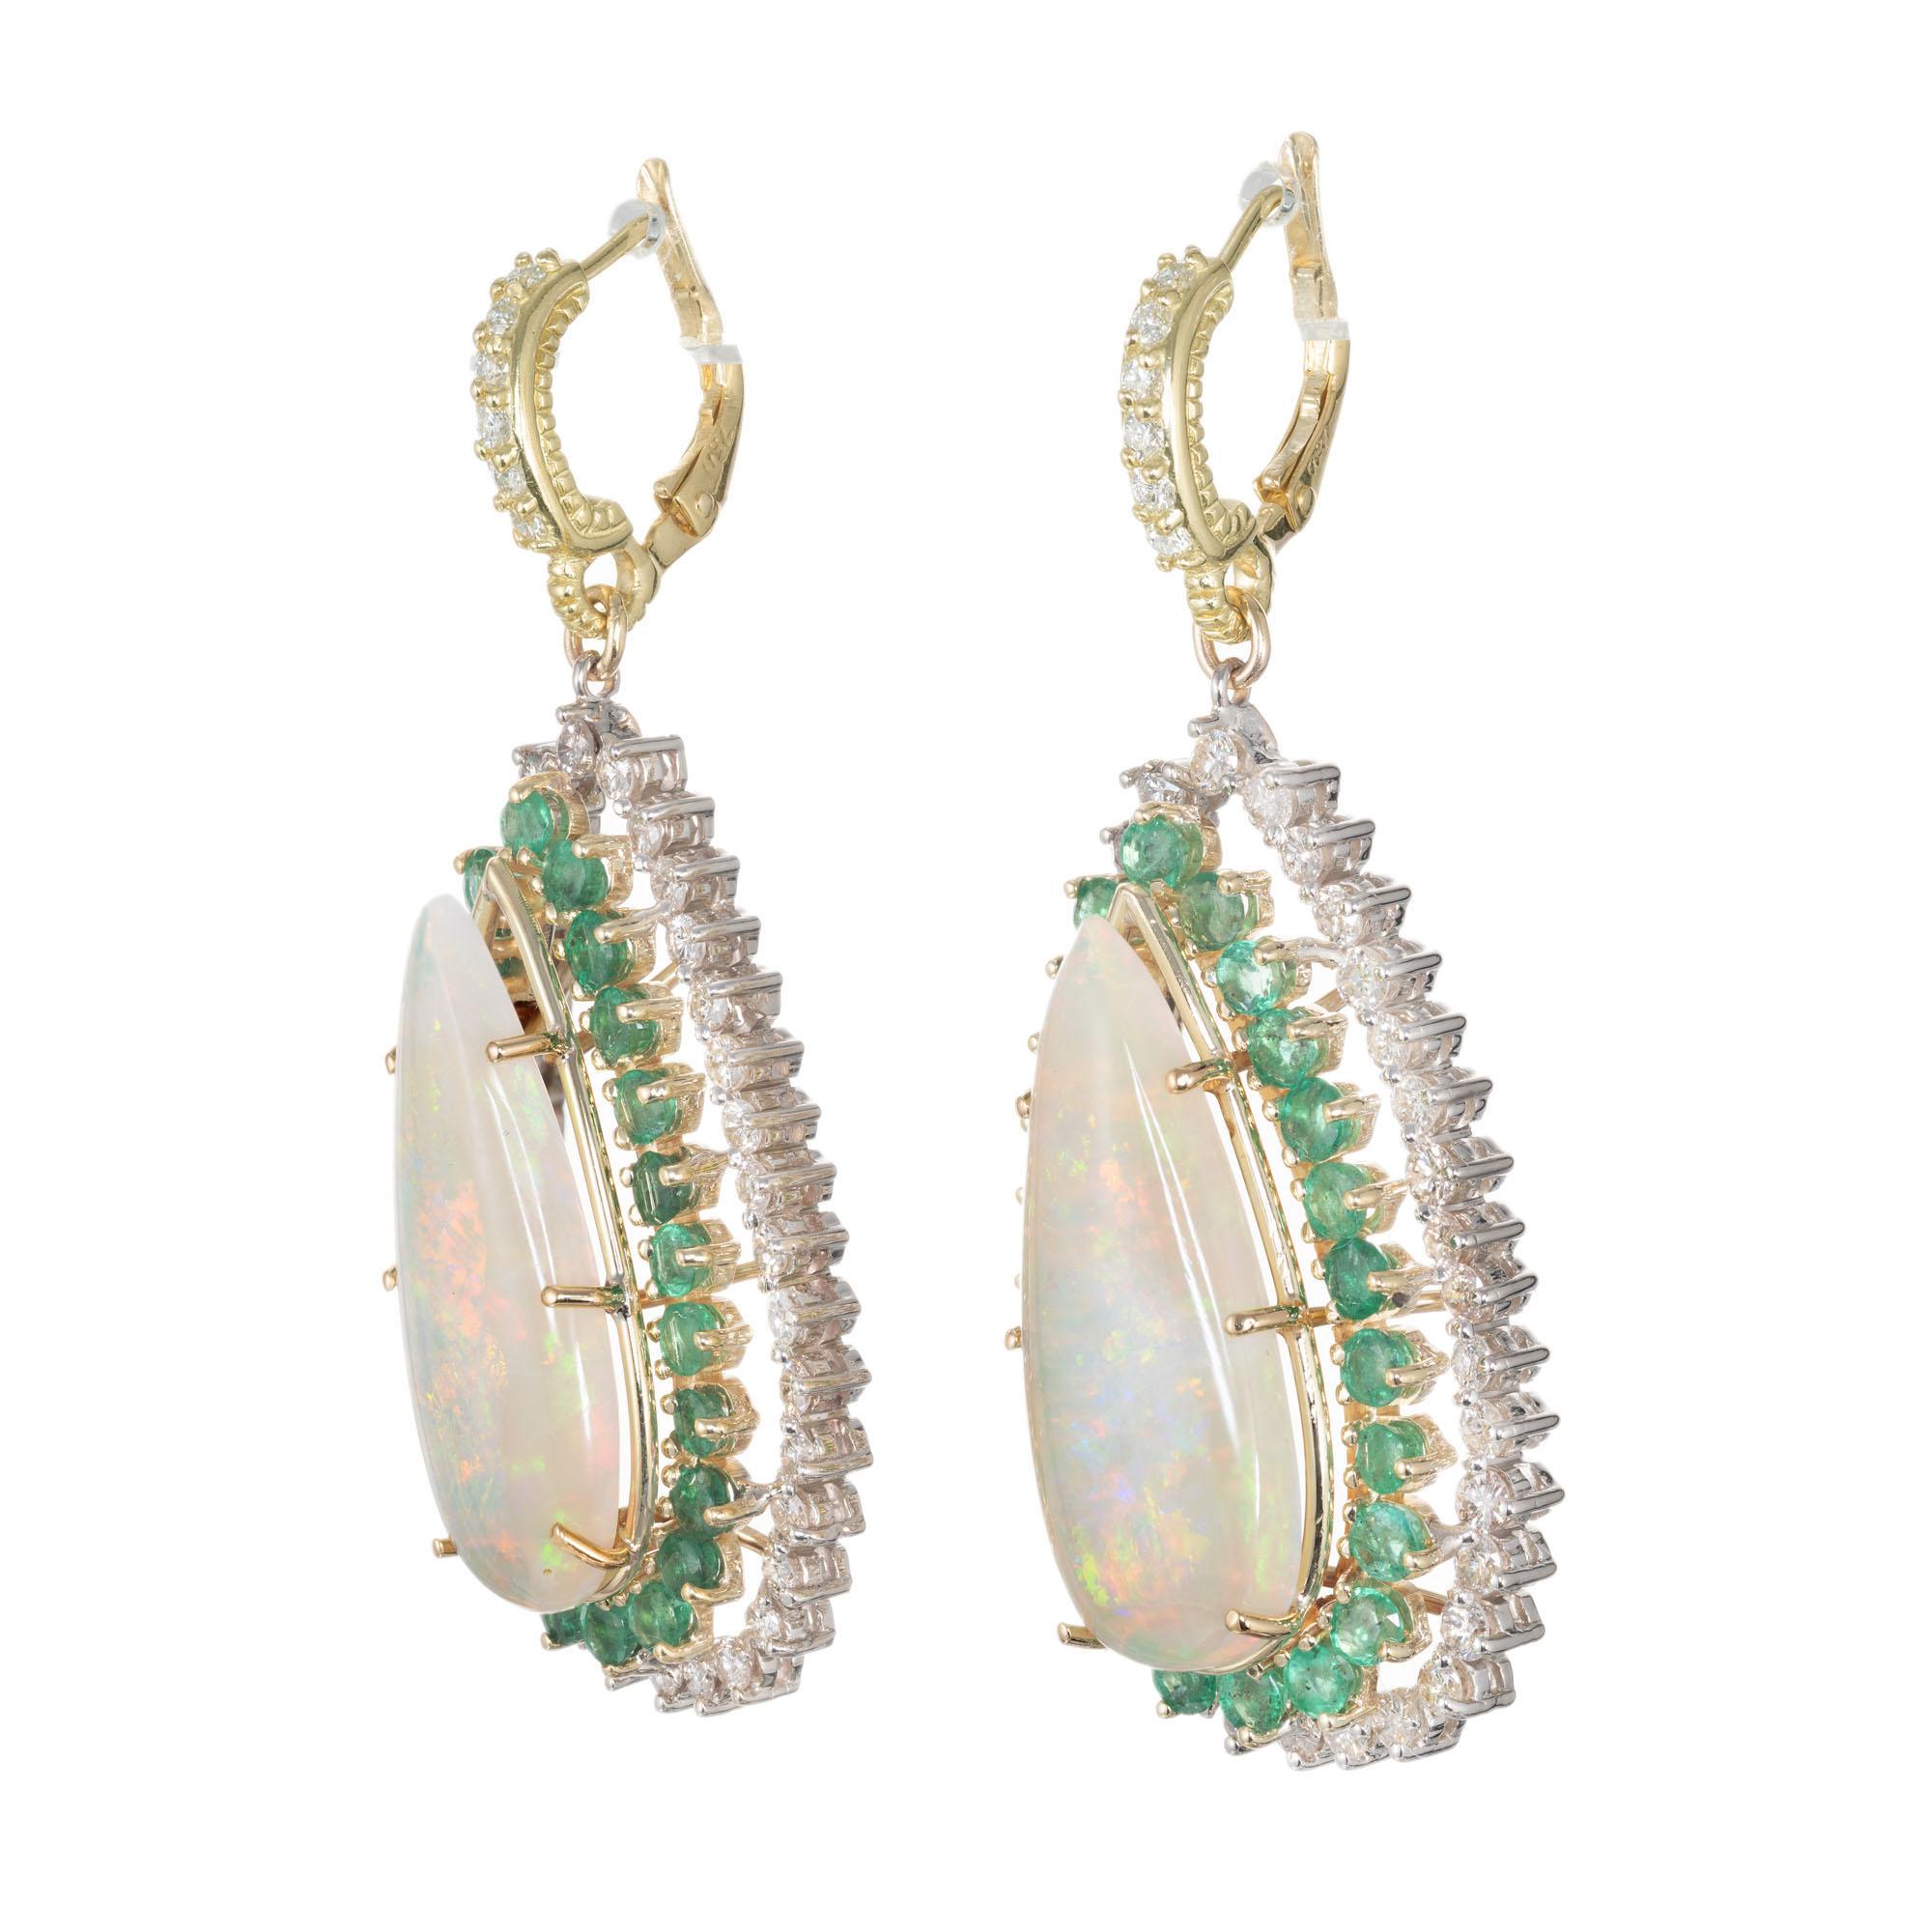 1960’s opal dangle earrings. Two pear shape 14.00ct opals with orange, green and blue flash. 48 round cut emeralds and 70 round cut diamond halos. Set in 14k yellow and white gold with 12 round brilliant cut accent diamonds along the hoops. 

2 pear